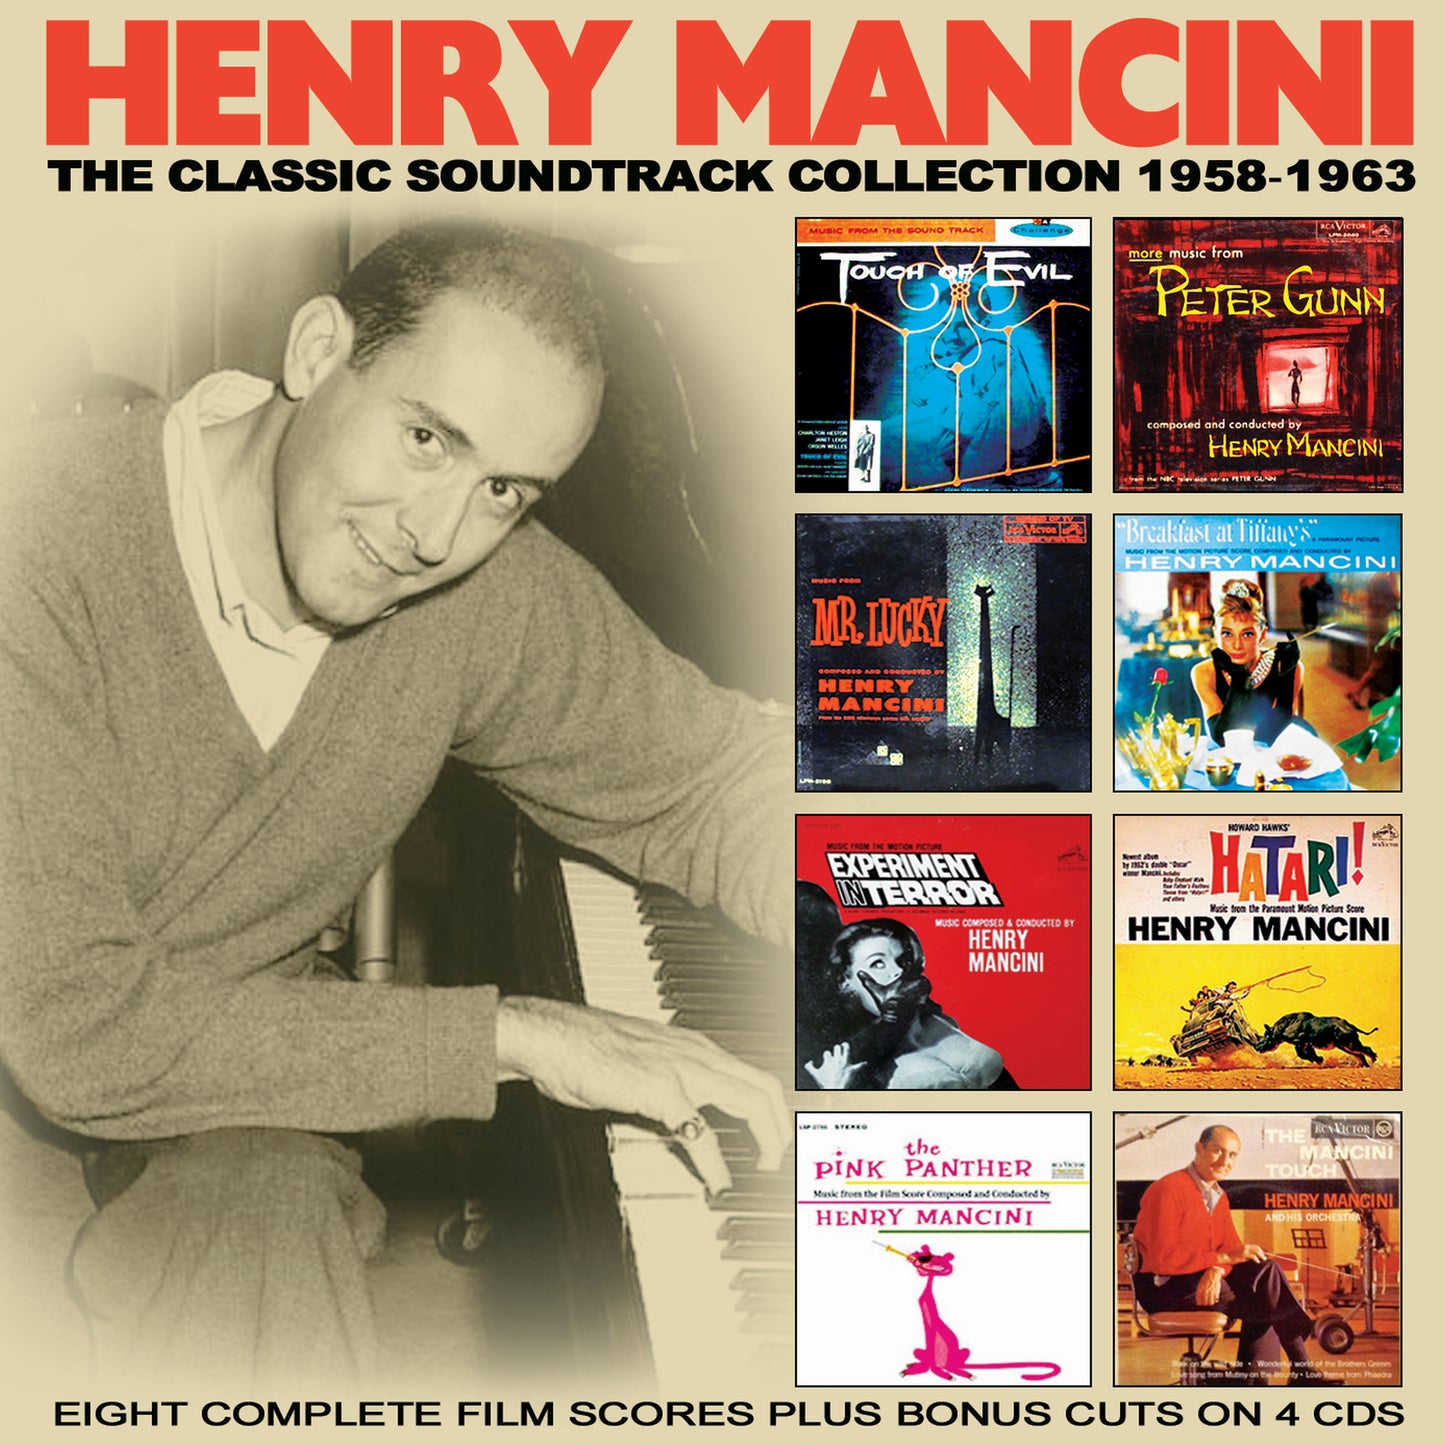 4CD - Henry Mancini - The Classic Soundtrack Collection: 1958-1963